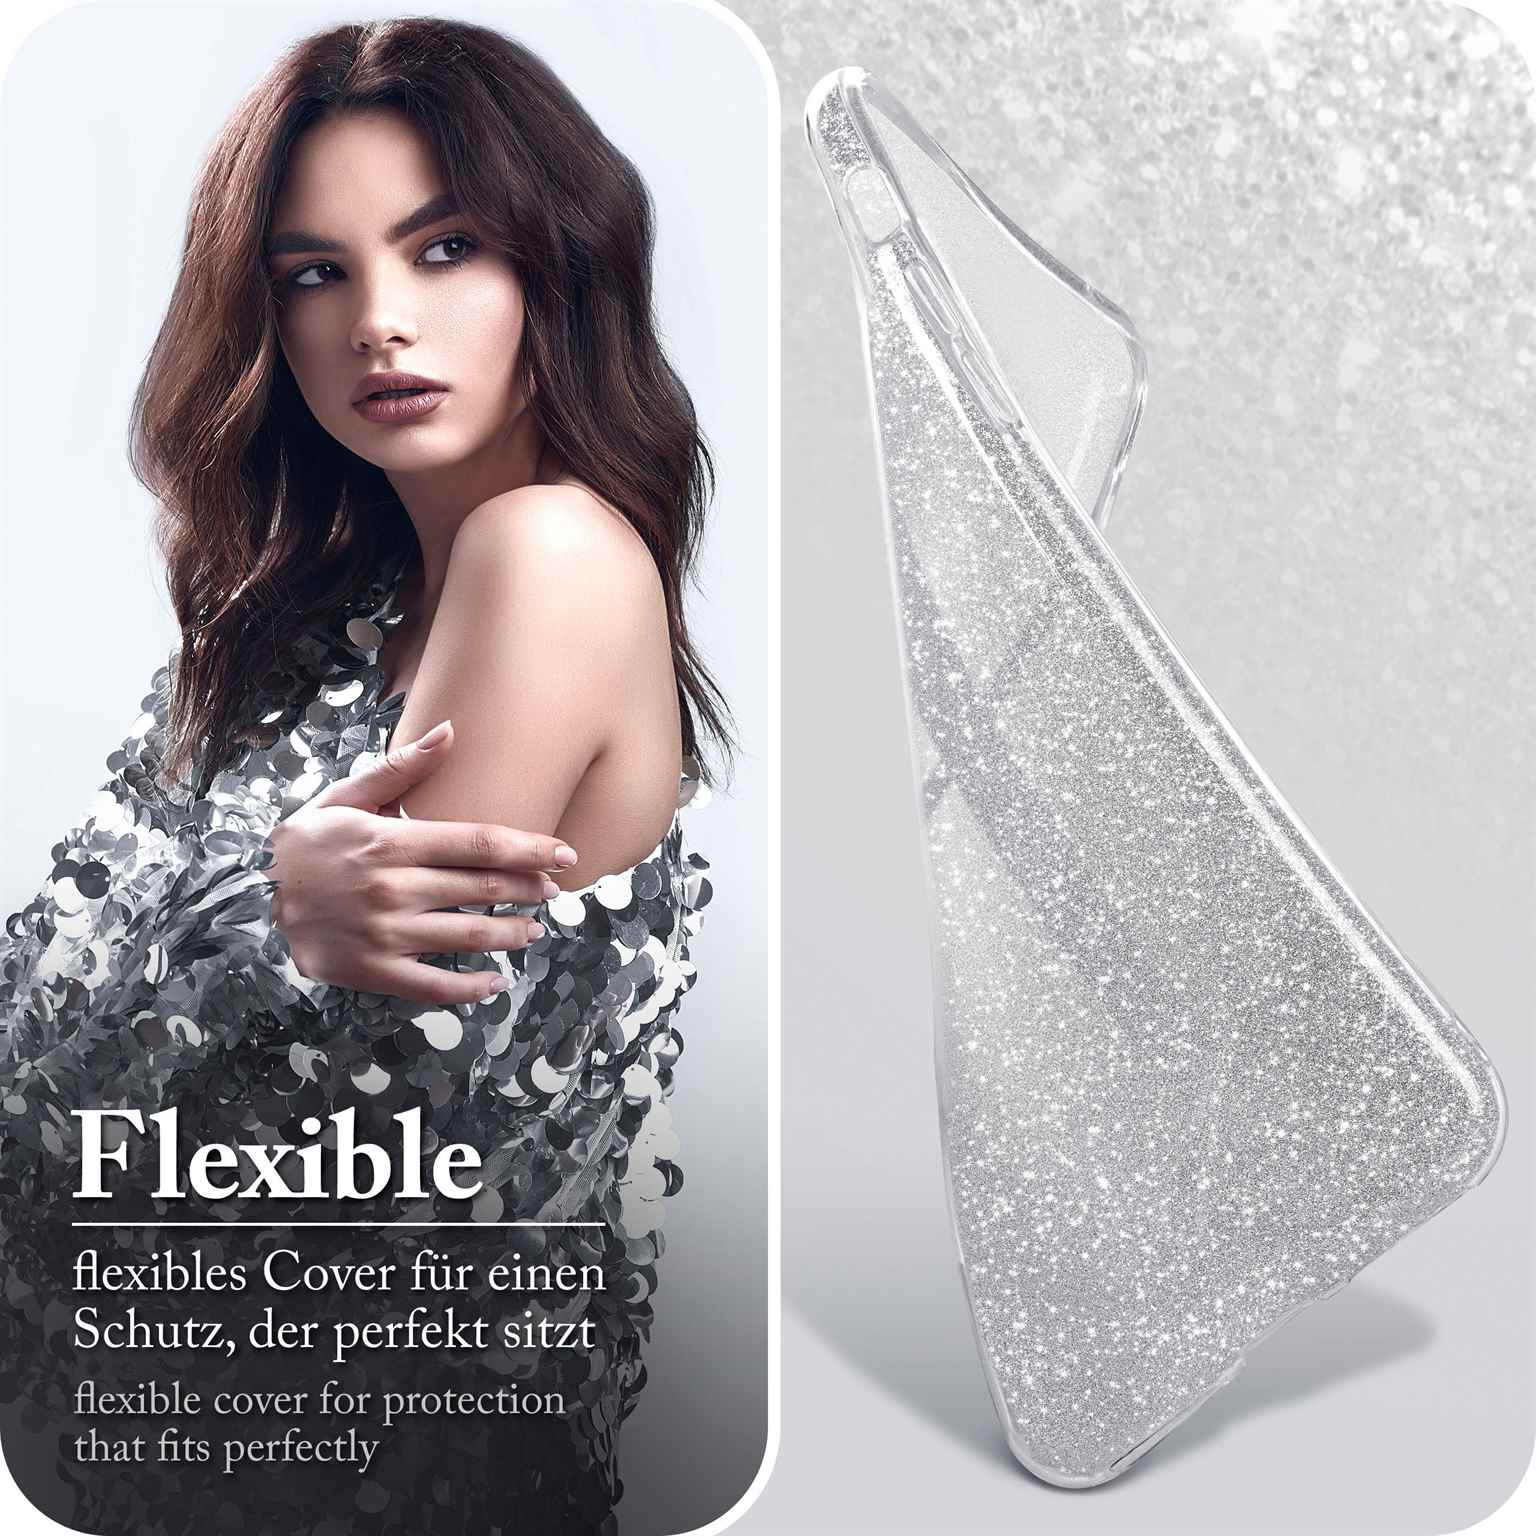 ONEFLOW Glitter Case, Backcover, - Samsung, Silver Sparkle A71, Galaxy